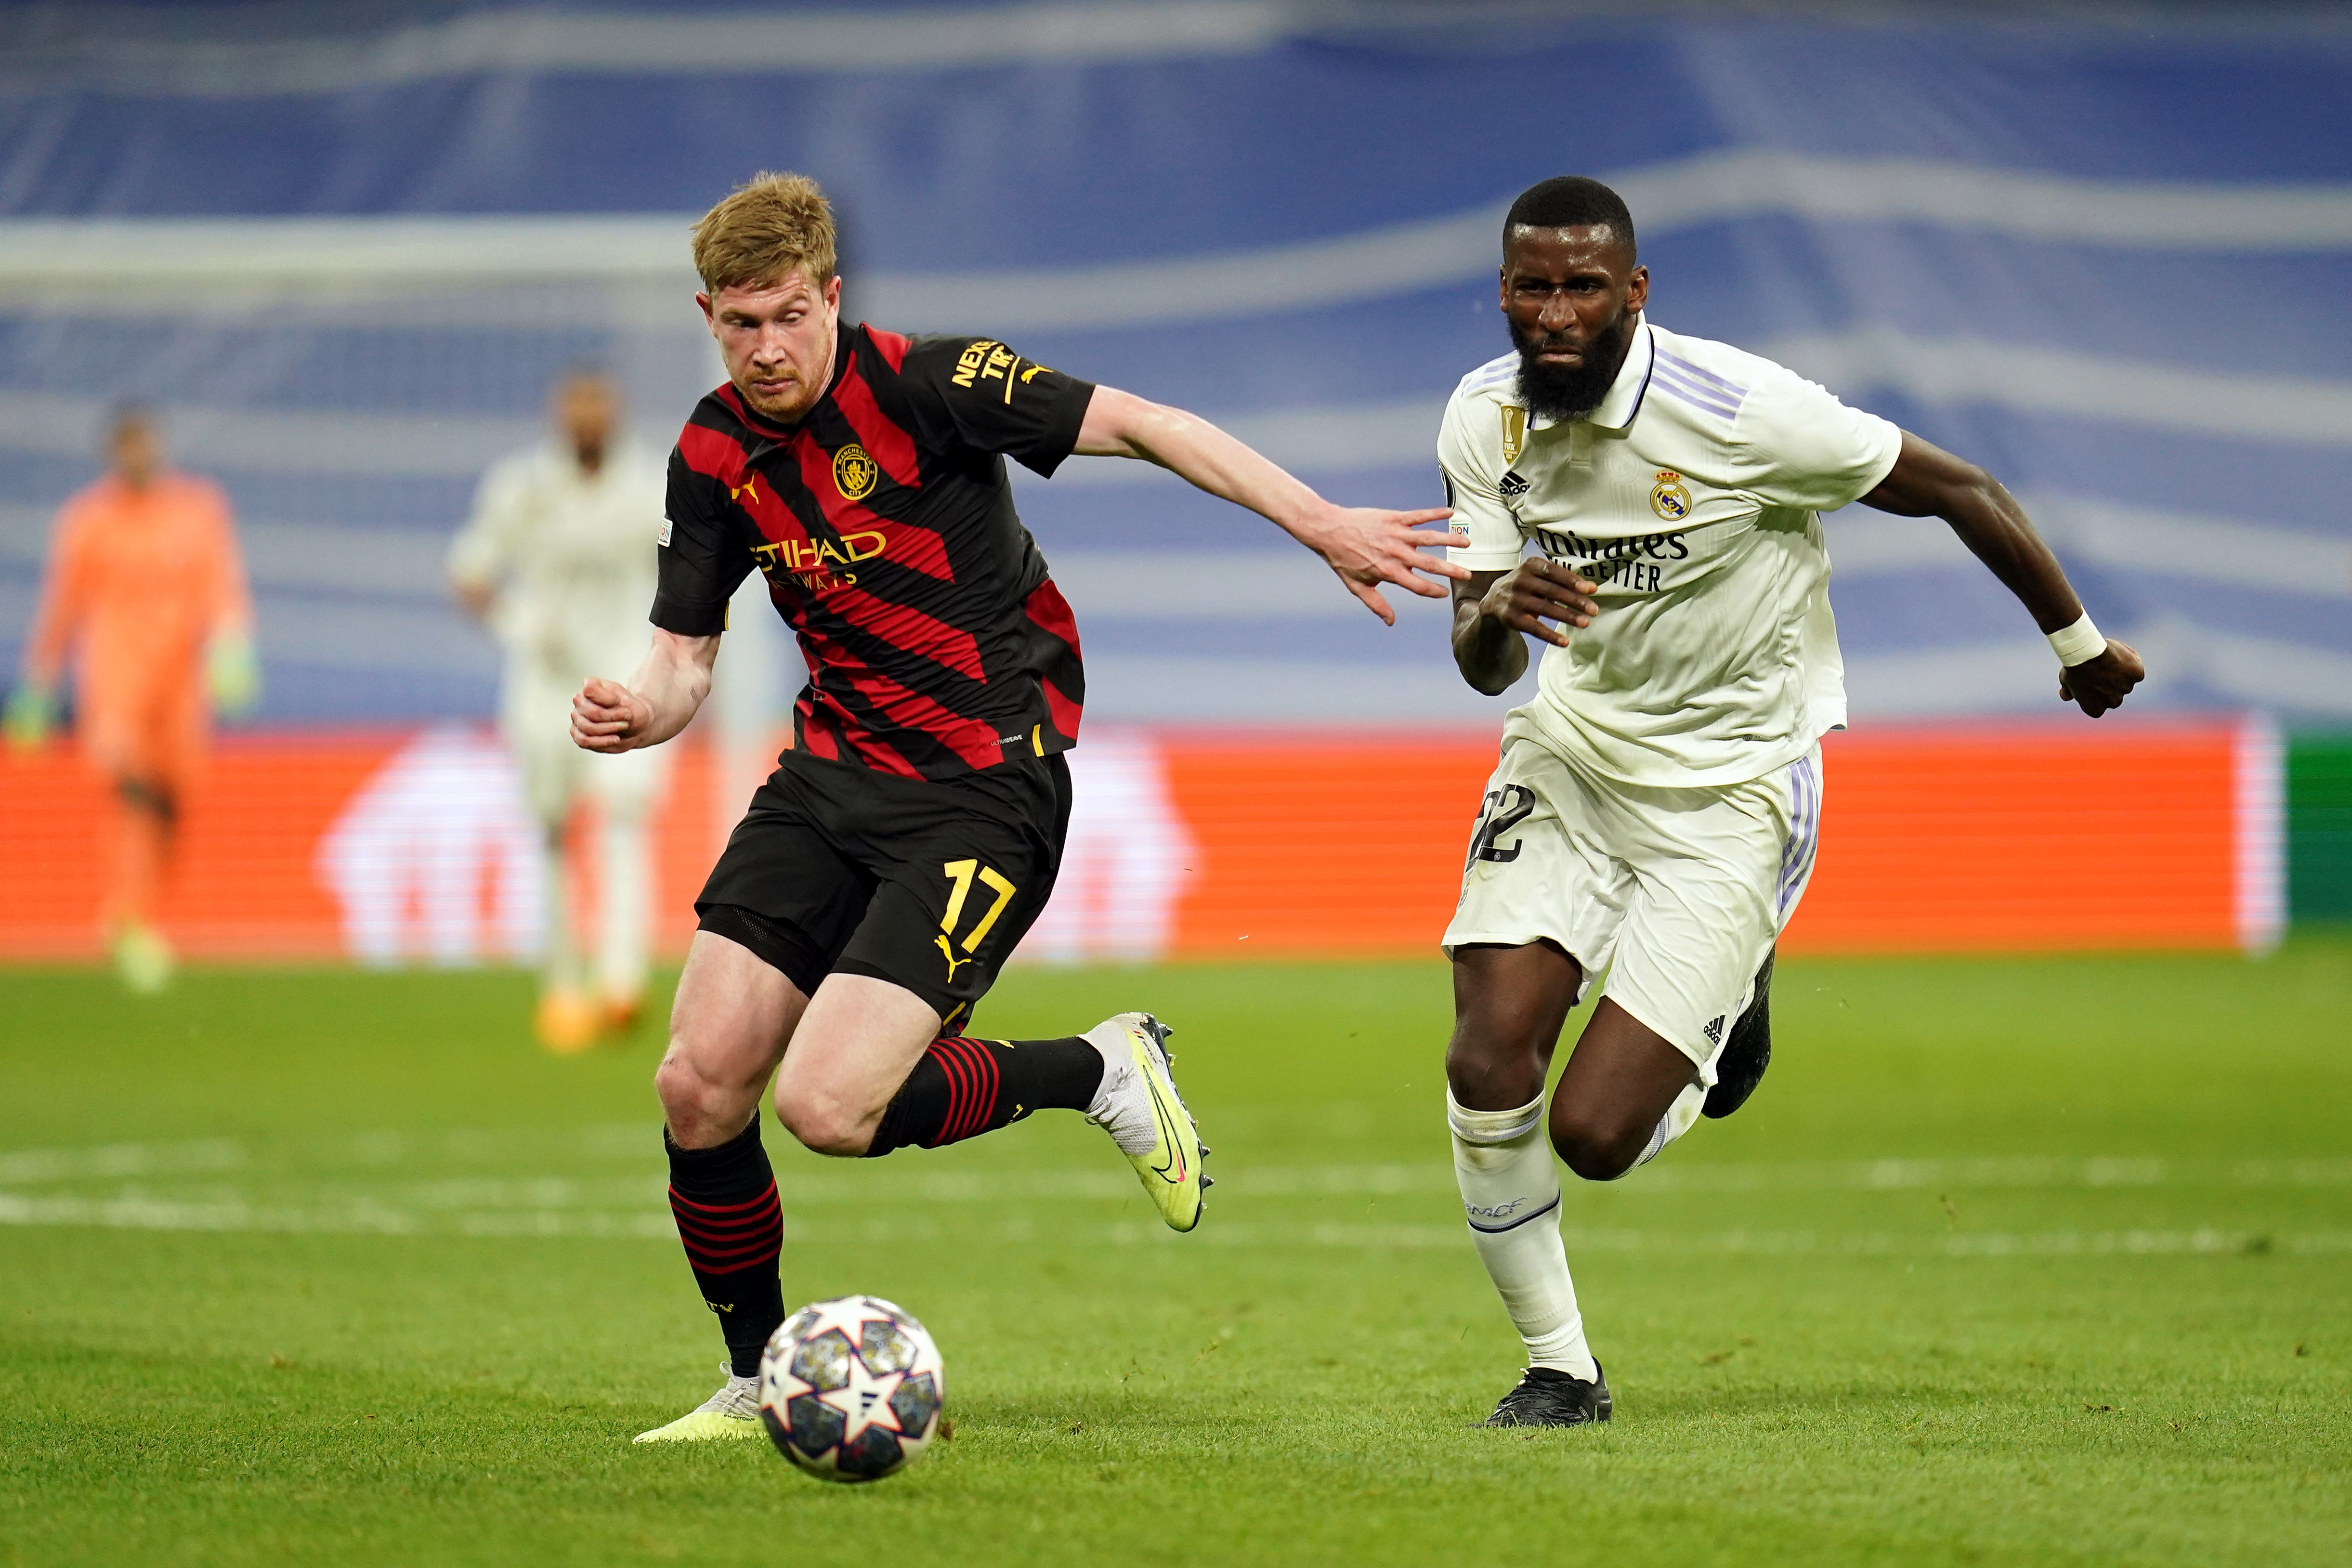  Kevin De Bruyne of Manchester City and Eduardo Camavinga of Real Madrid in action during the UEFA Champions League quarterfinal second leg match between Real Madrid and Manchester City at the Santiago Bernabeu in Madrid, Spain.